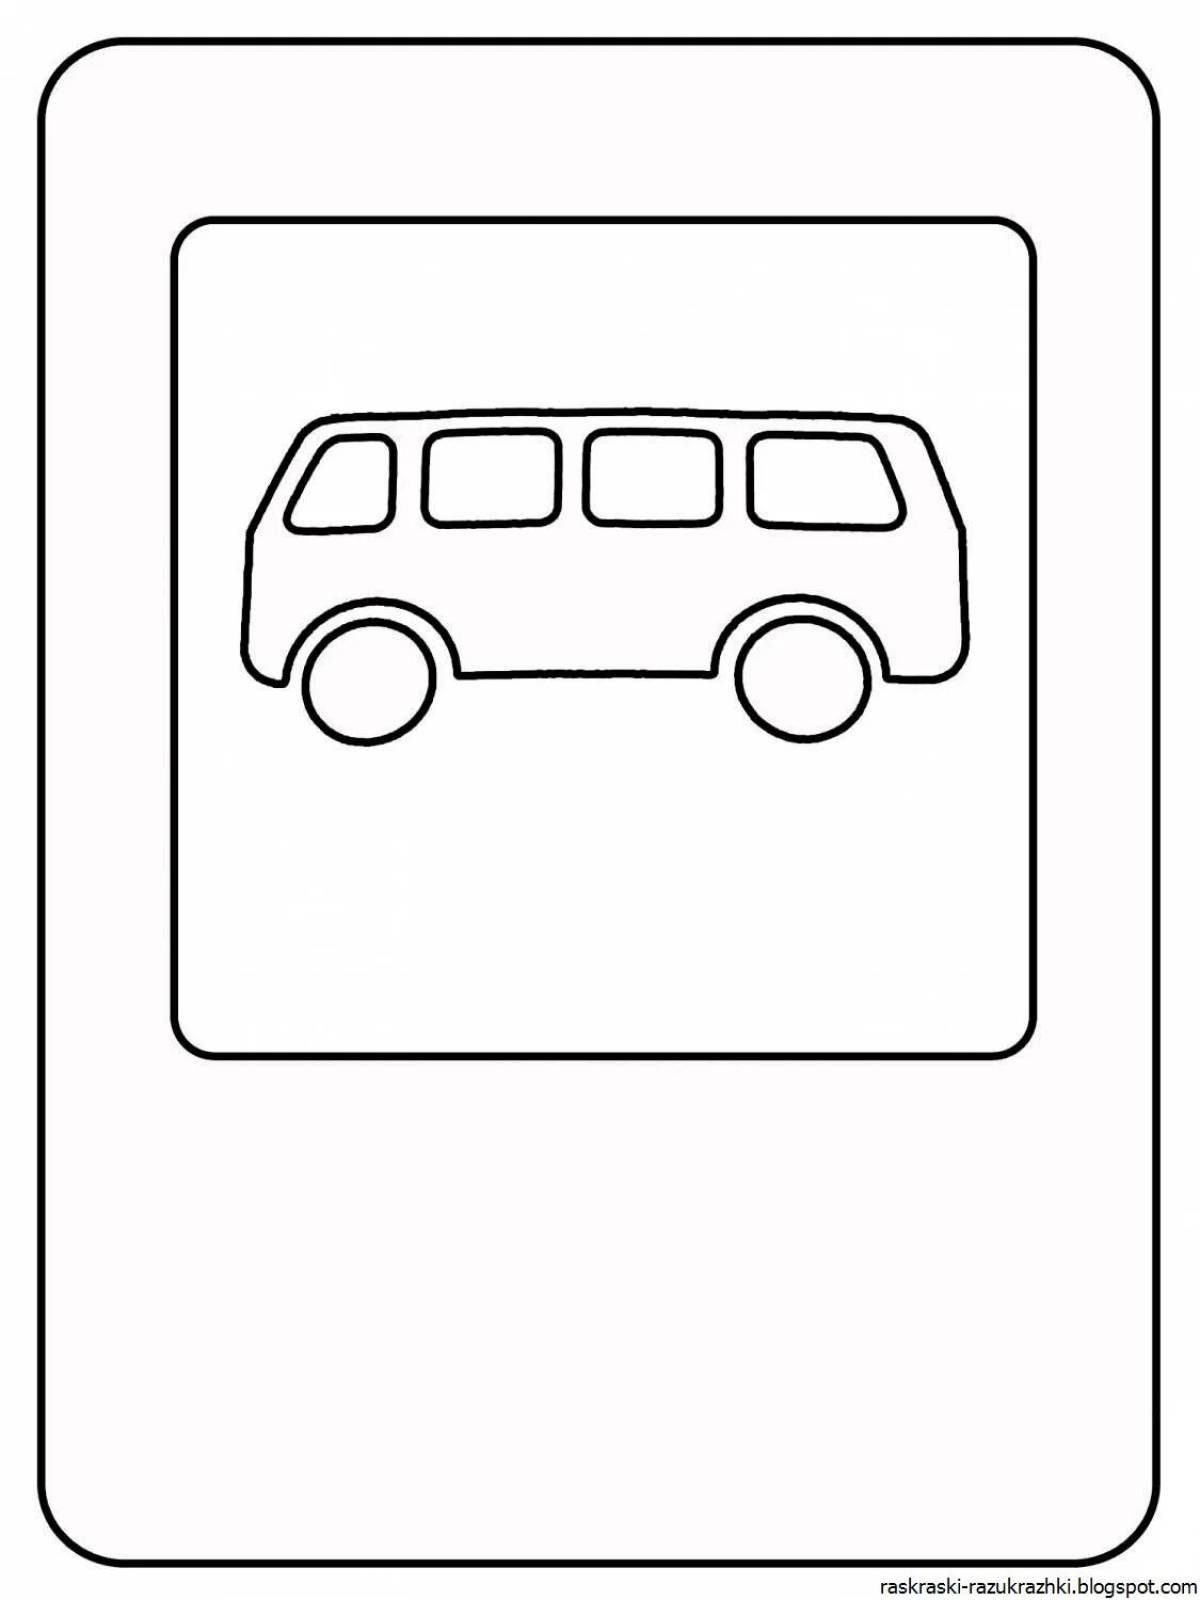 Traffic signs for preschool children according to traffic rules #11